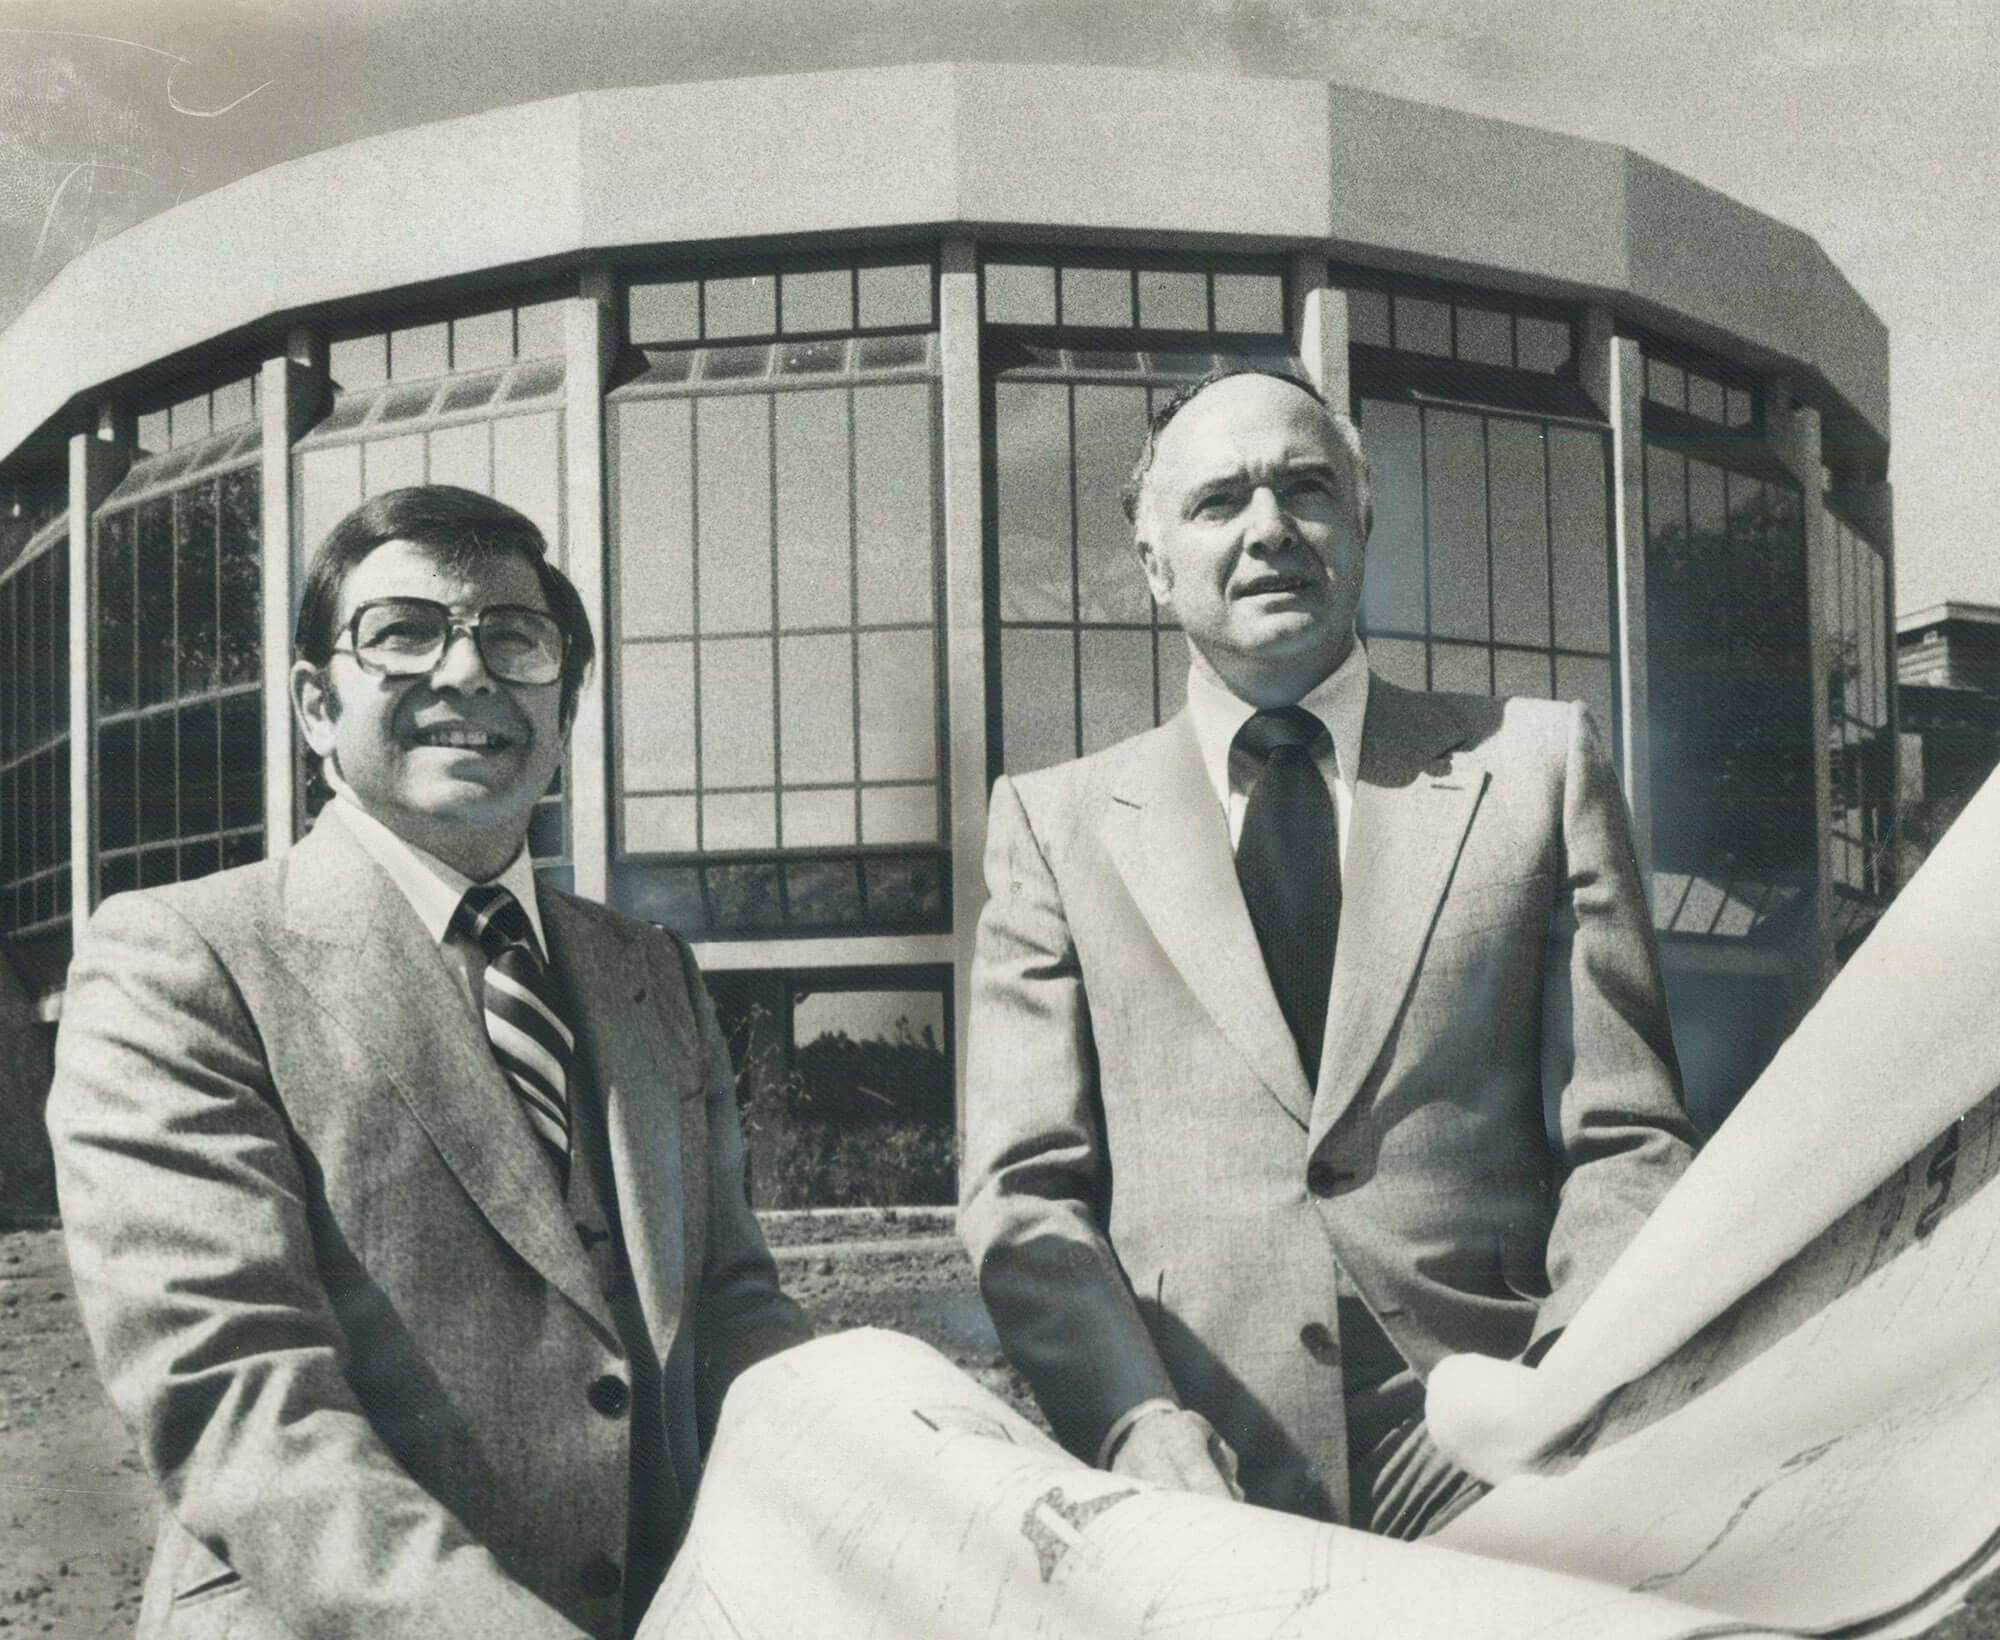 Two men holding architectural plans outside the nearly complete rotunda of the Columbus Centre